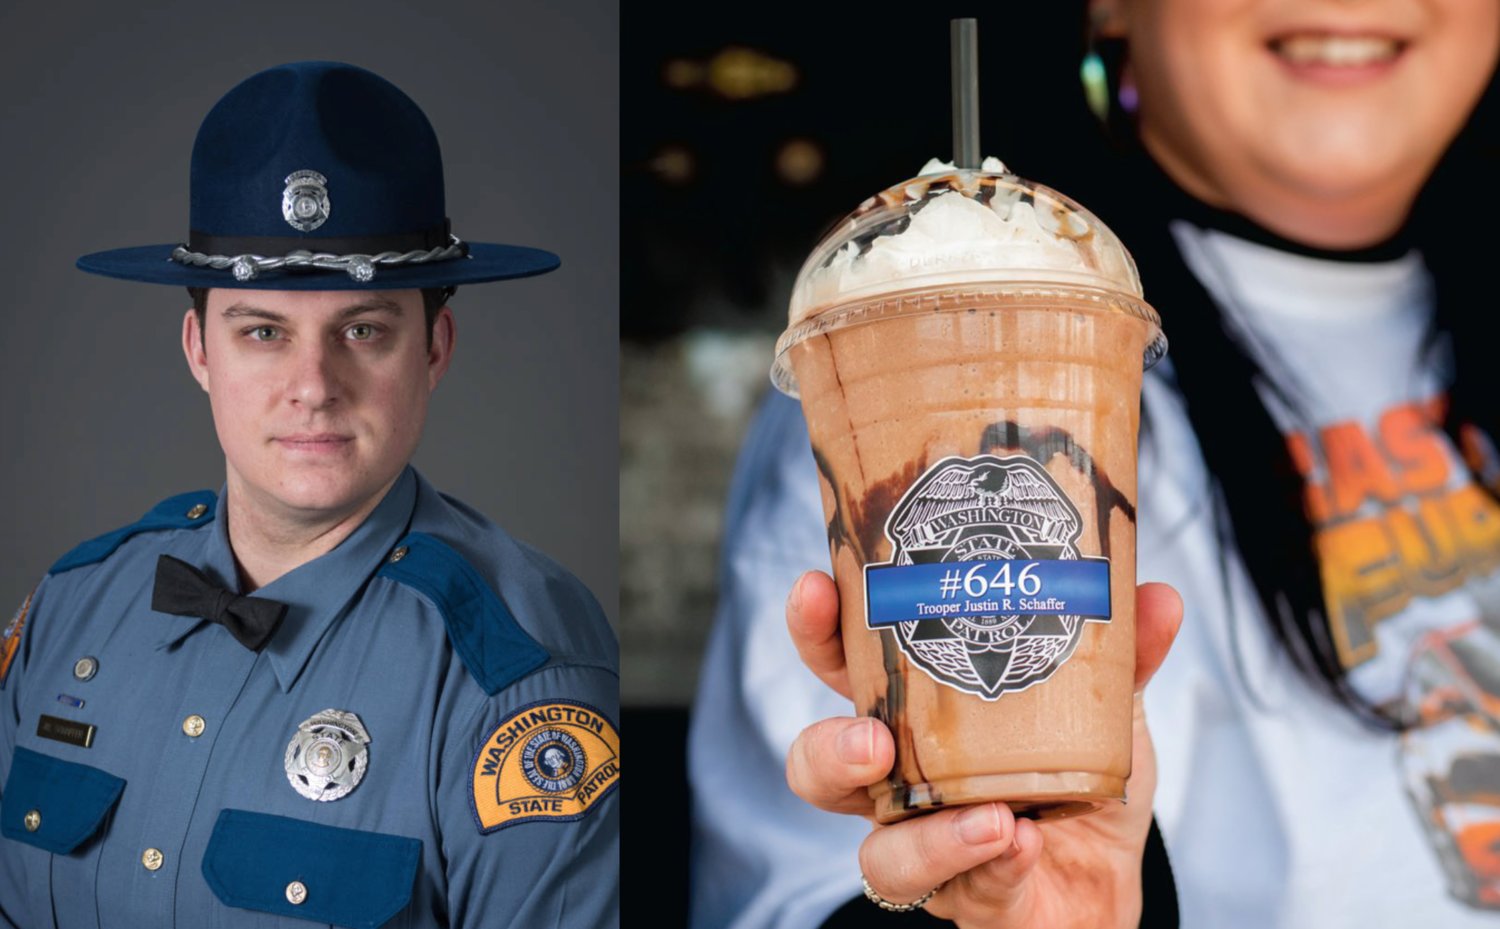 To honor the three-year anniversary of the day Washington State Patrol Trooper Justin R. Schaffer was fatally struck by a vehicle while placing spike strips on Interstate 5 in Chehalis, Adna coffee stand Skull & Crossbones Coffee Co. will offer two drink specials on Friday, March 24. 